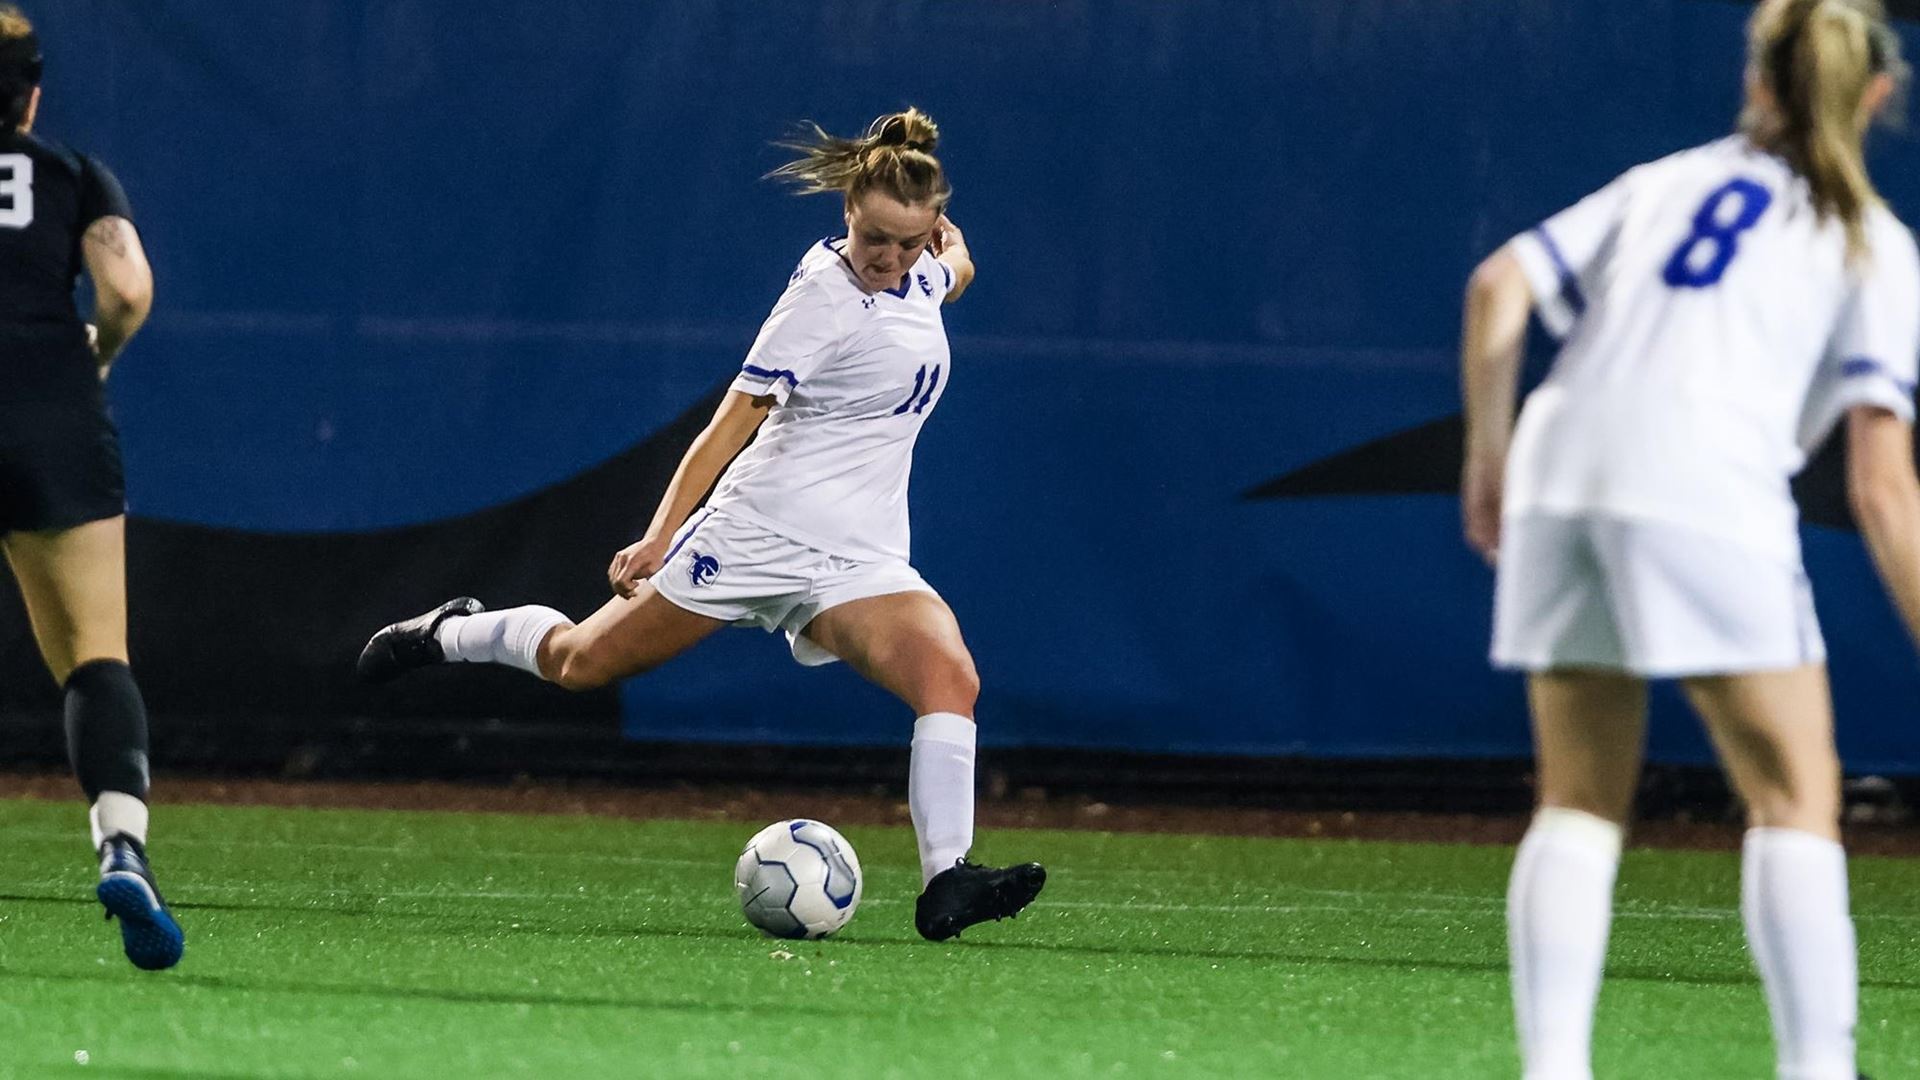 A Seton Hall women's soccer player kicks the ball during a game against Lafayette.